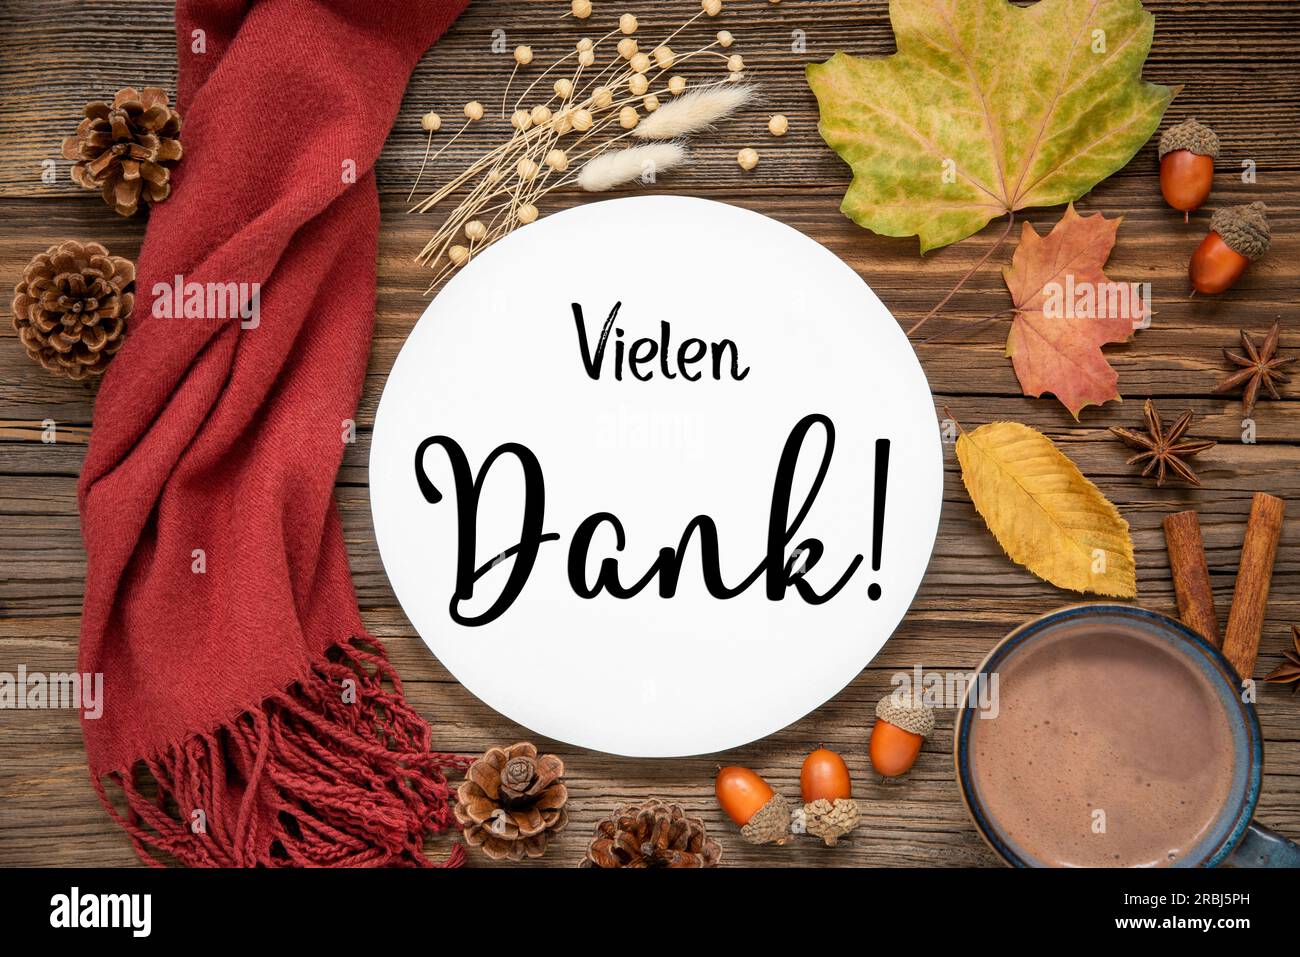 Autumn Decoration, Flat Lay With Colorful Maple Leaves, Cozy Atmosphere and Label With German Text Vielen Dank, Which Means Many Thanks In English Stock Photo